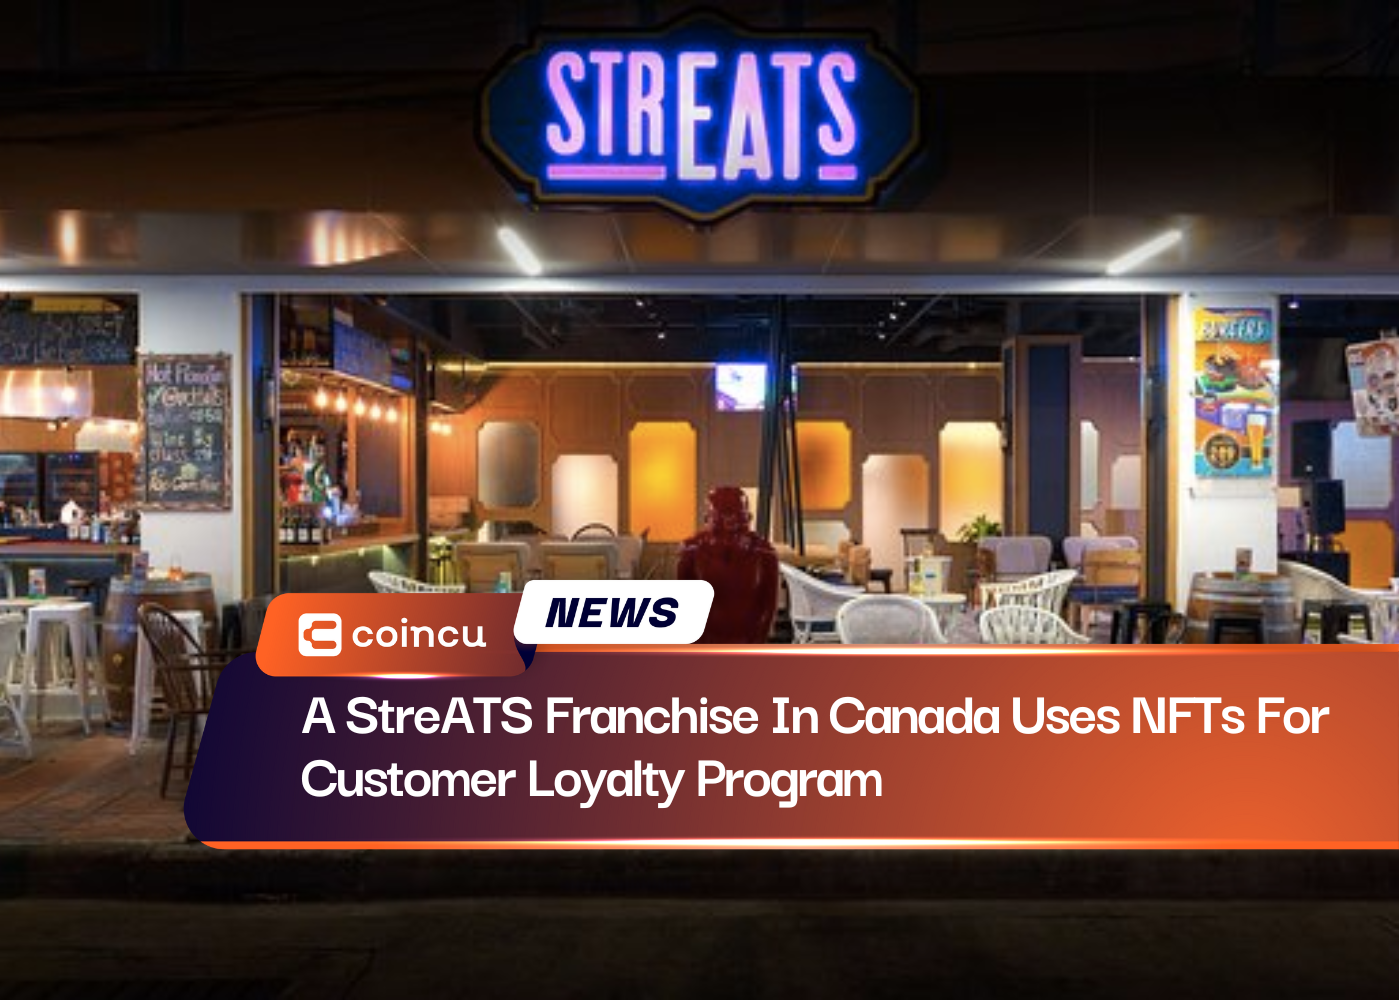 A StreATS Franchise In Canada Uses NFTs For Customer Loyalty Program